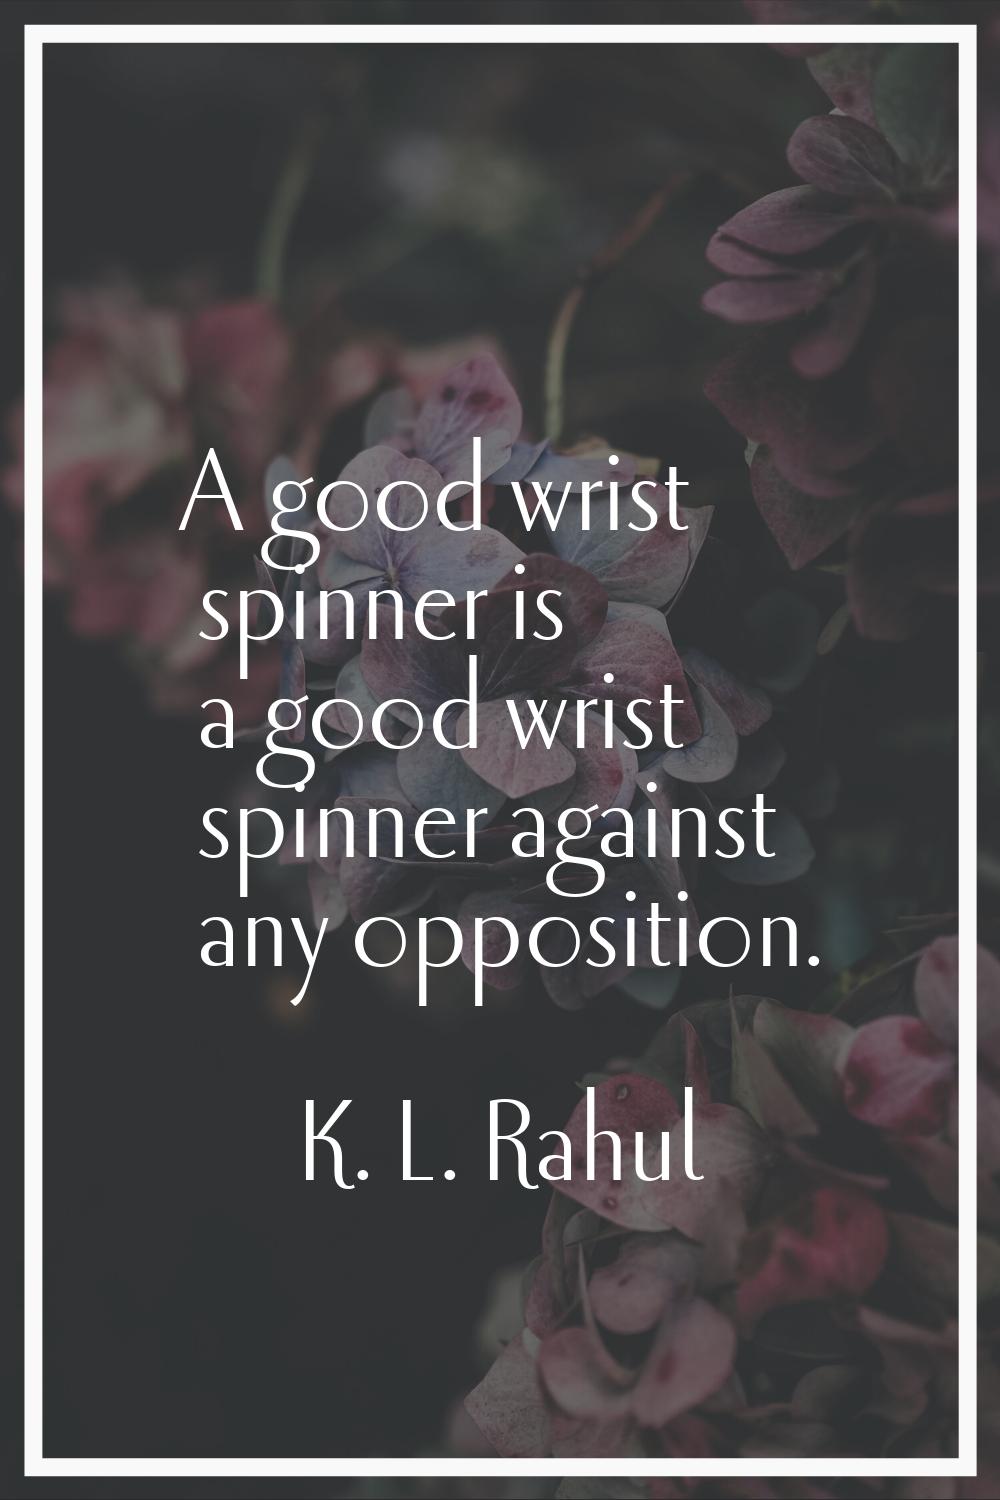 A good wrist spinner is a good wrist spinner against any opposition.